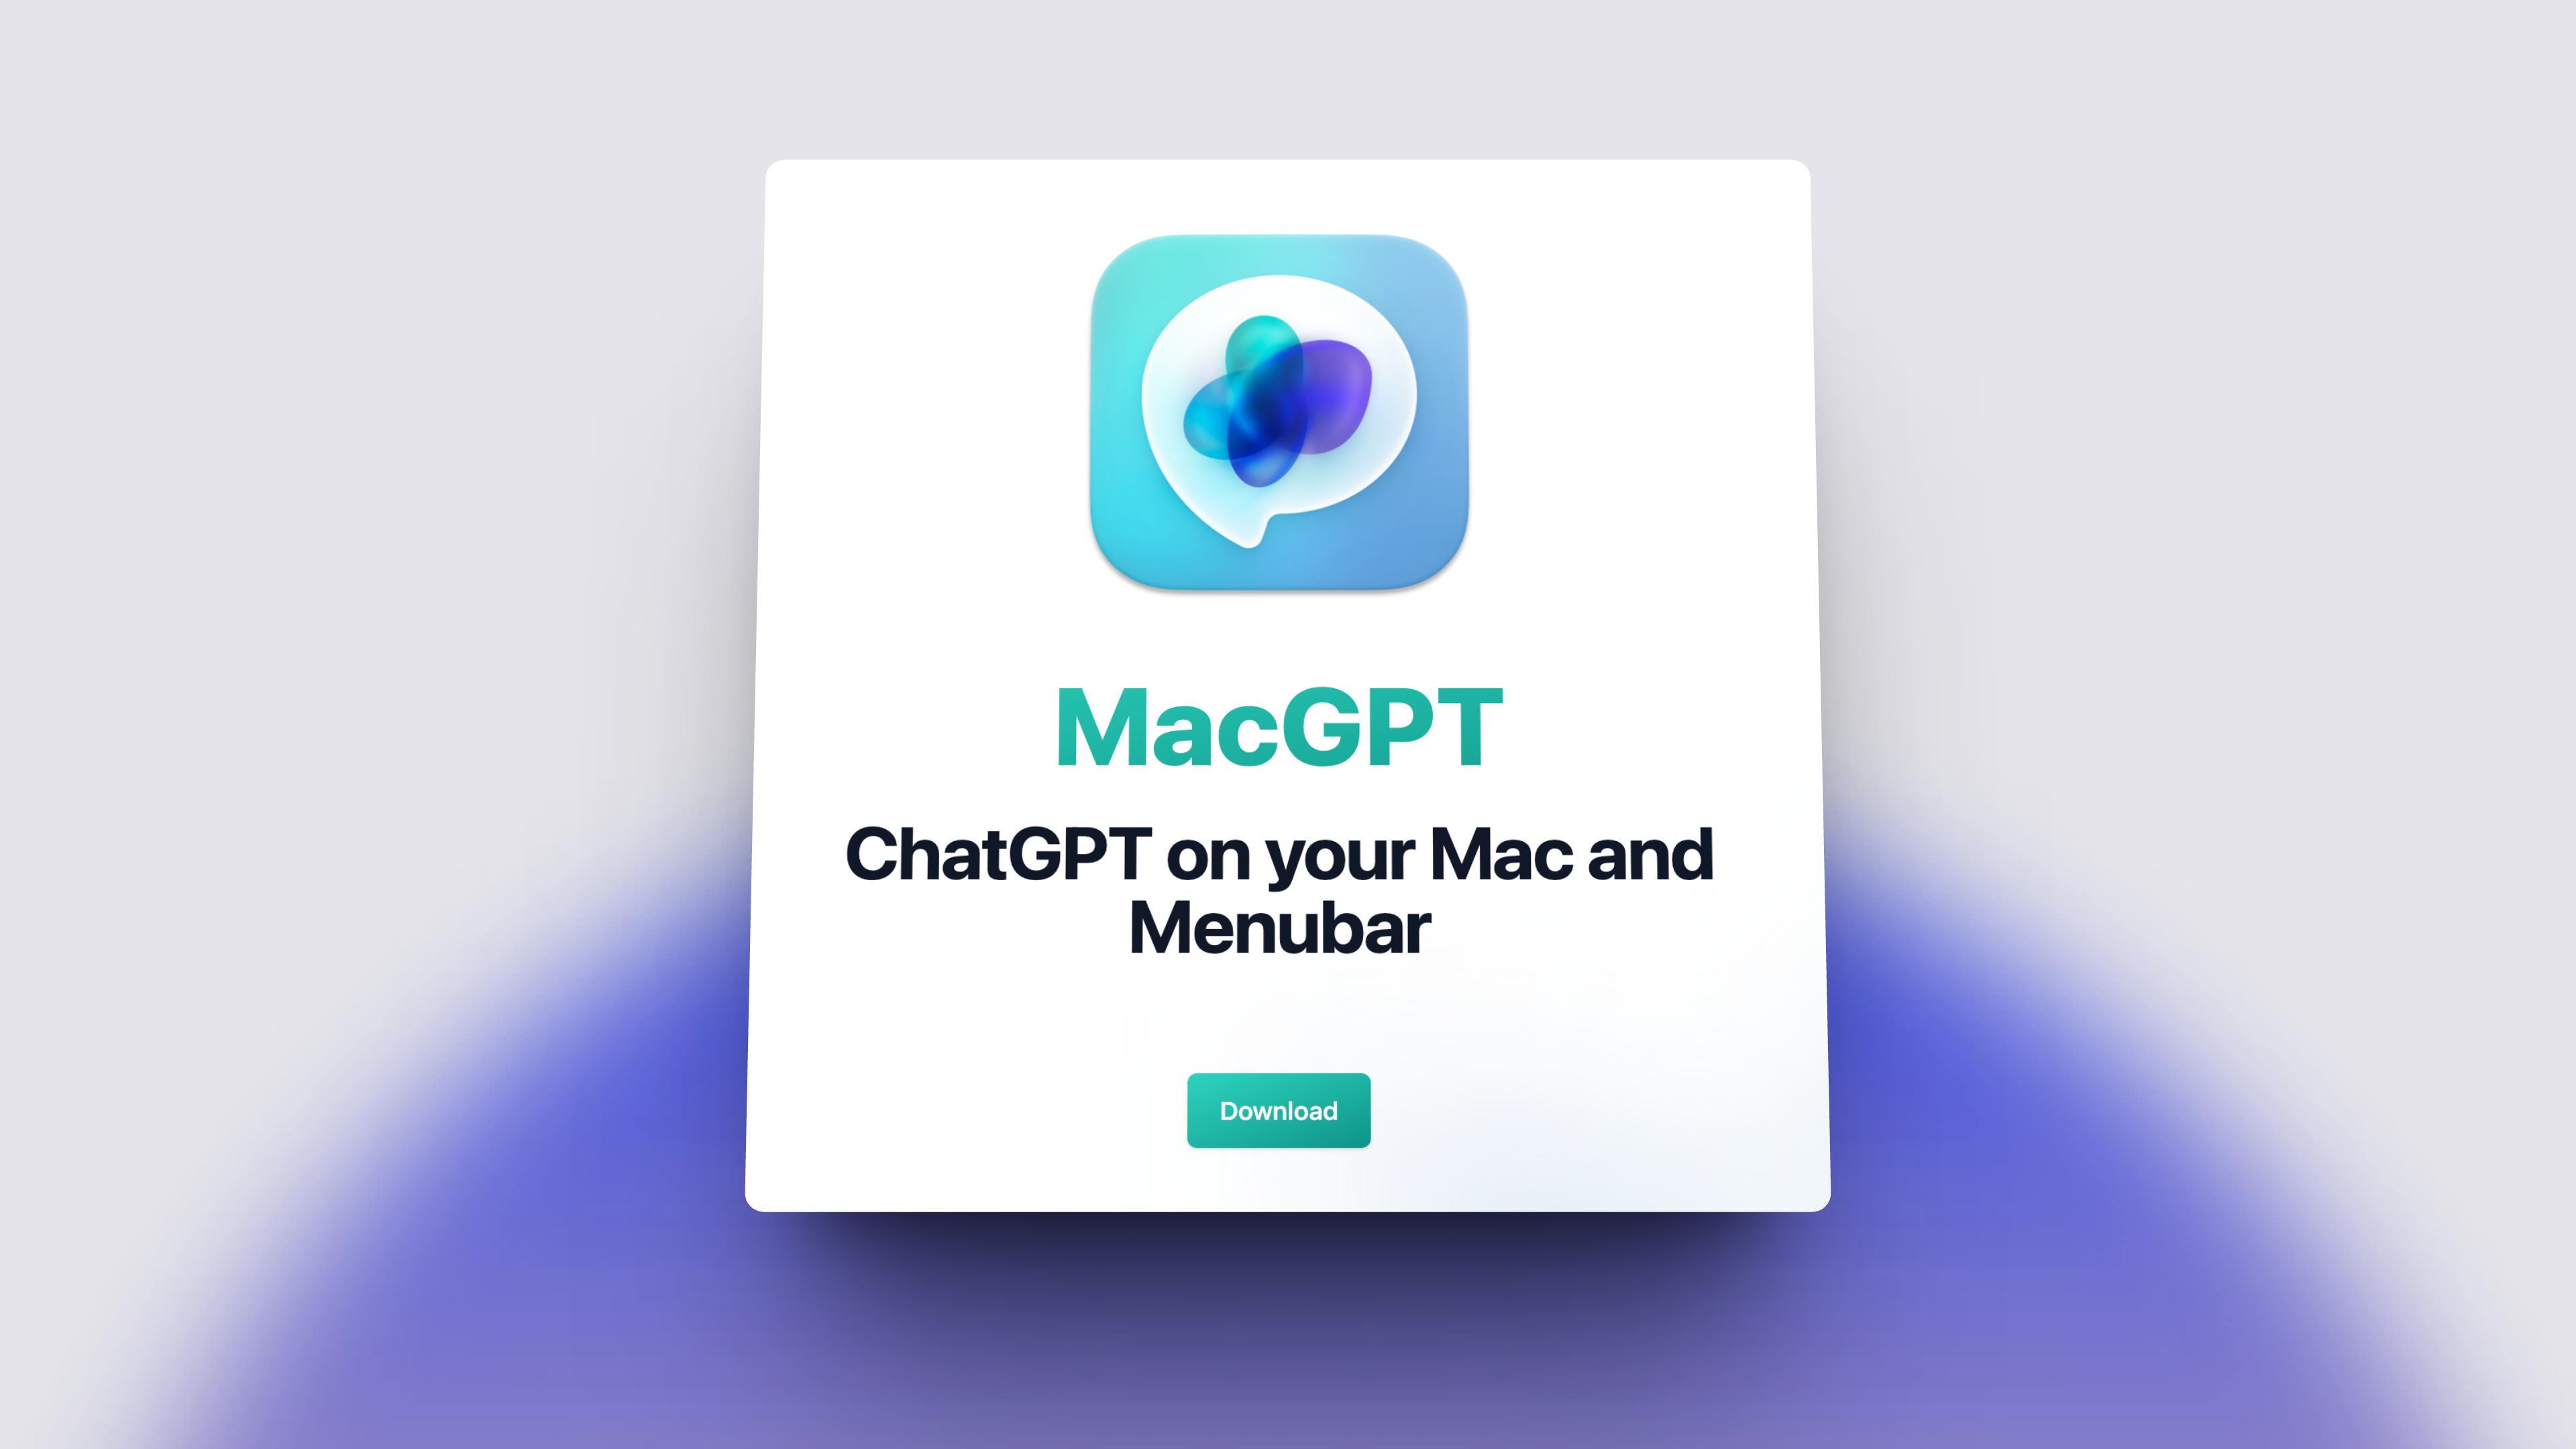 Image of a digital advertisement for MacGPT, a chat interface application designed for Mac computers, featuring a colorful logo and a chat bubble graphic.